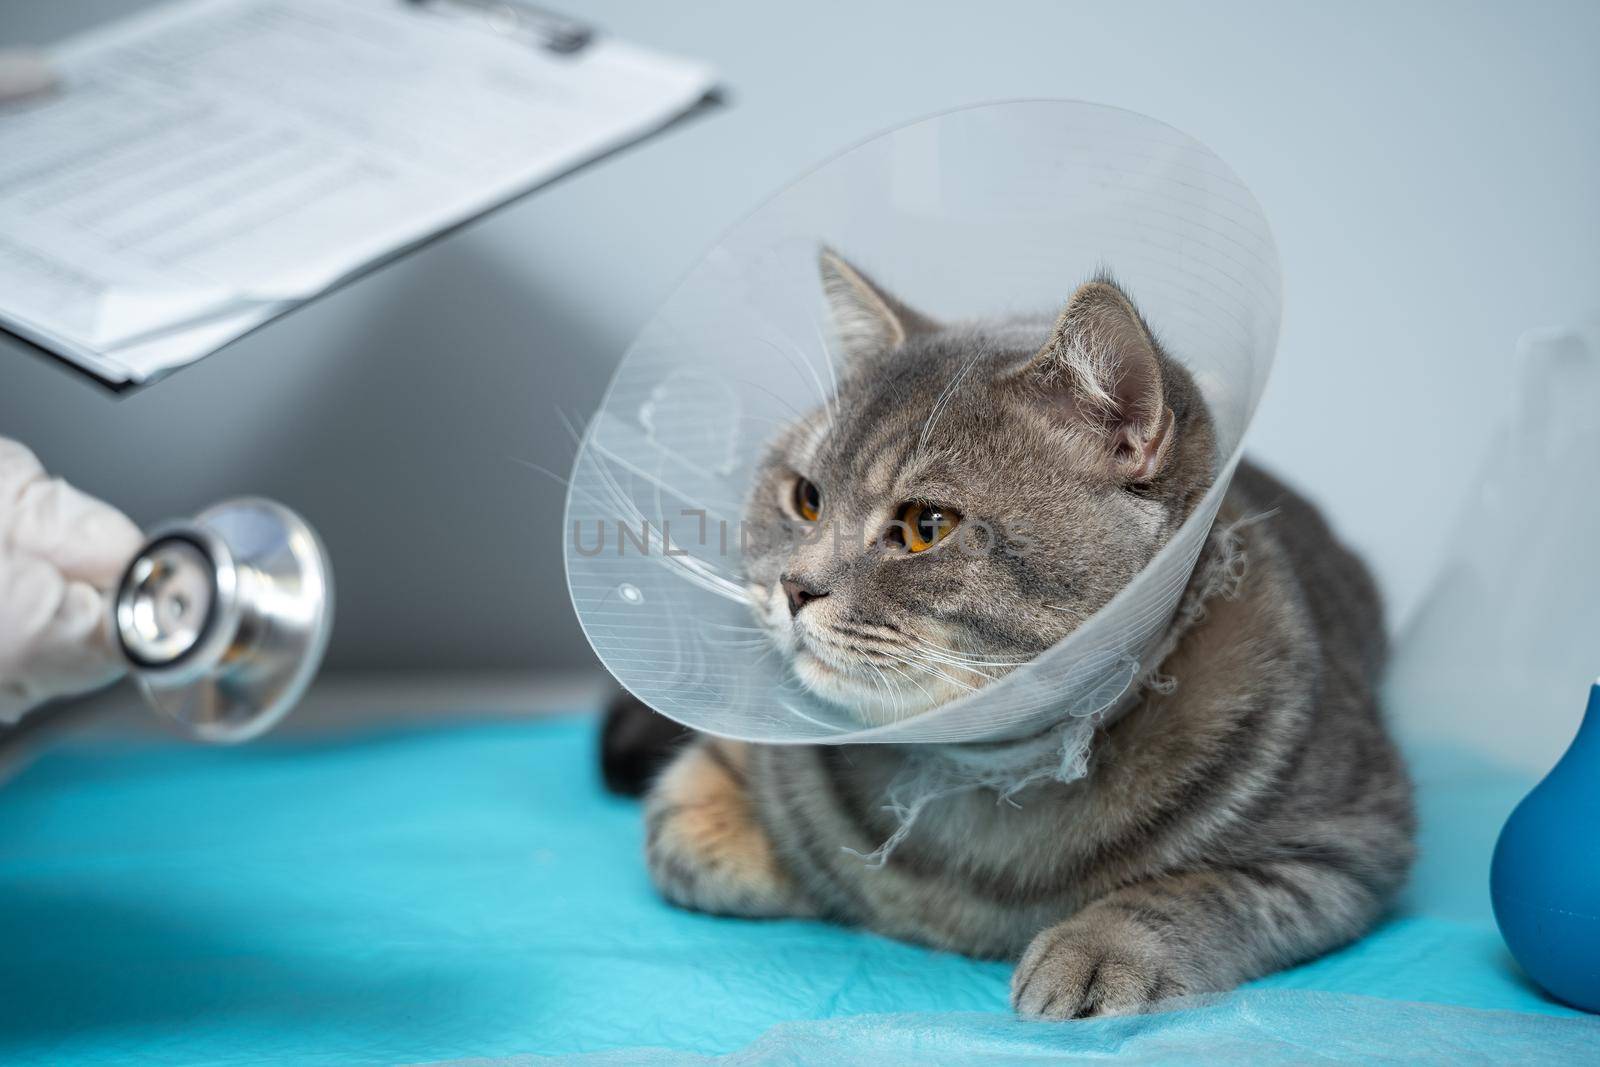 Close up of cat with an Elizabethan veterinary collar on veterinary examination table. Woman doctor in medical uniform with white gloves examines cat. Pet care concept, veterinary, healthy animals by Tomashevska